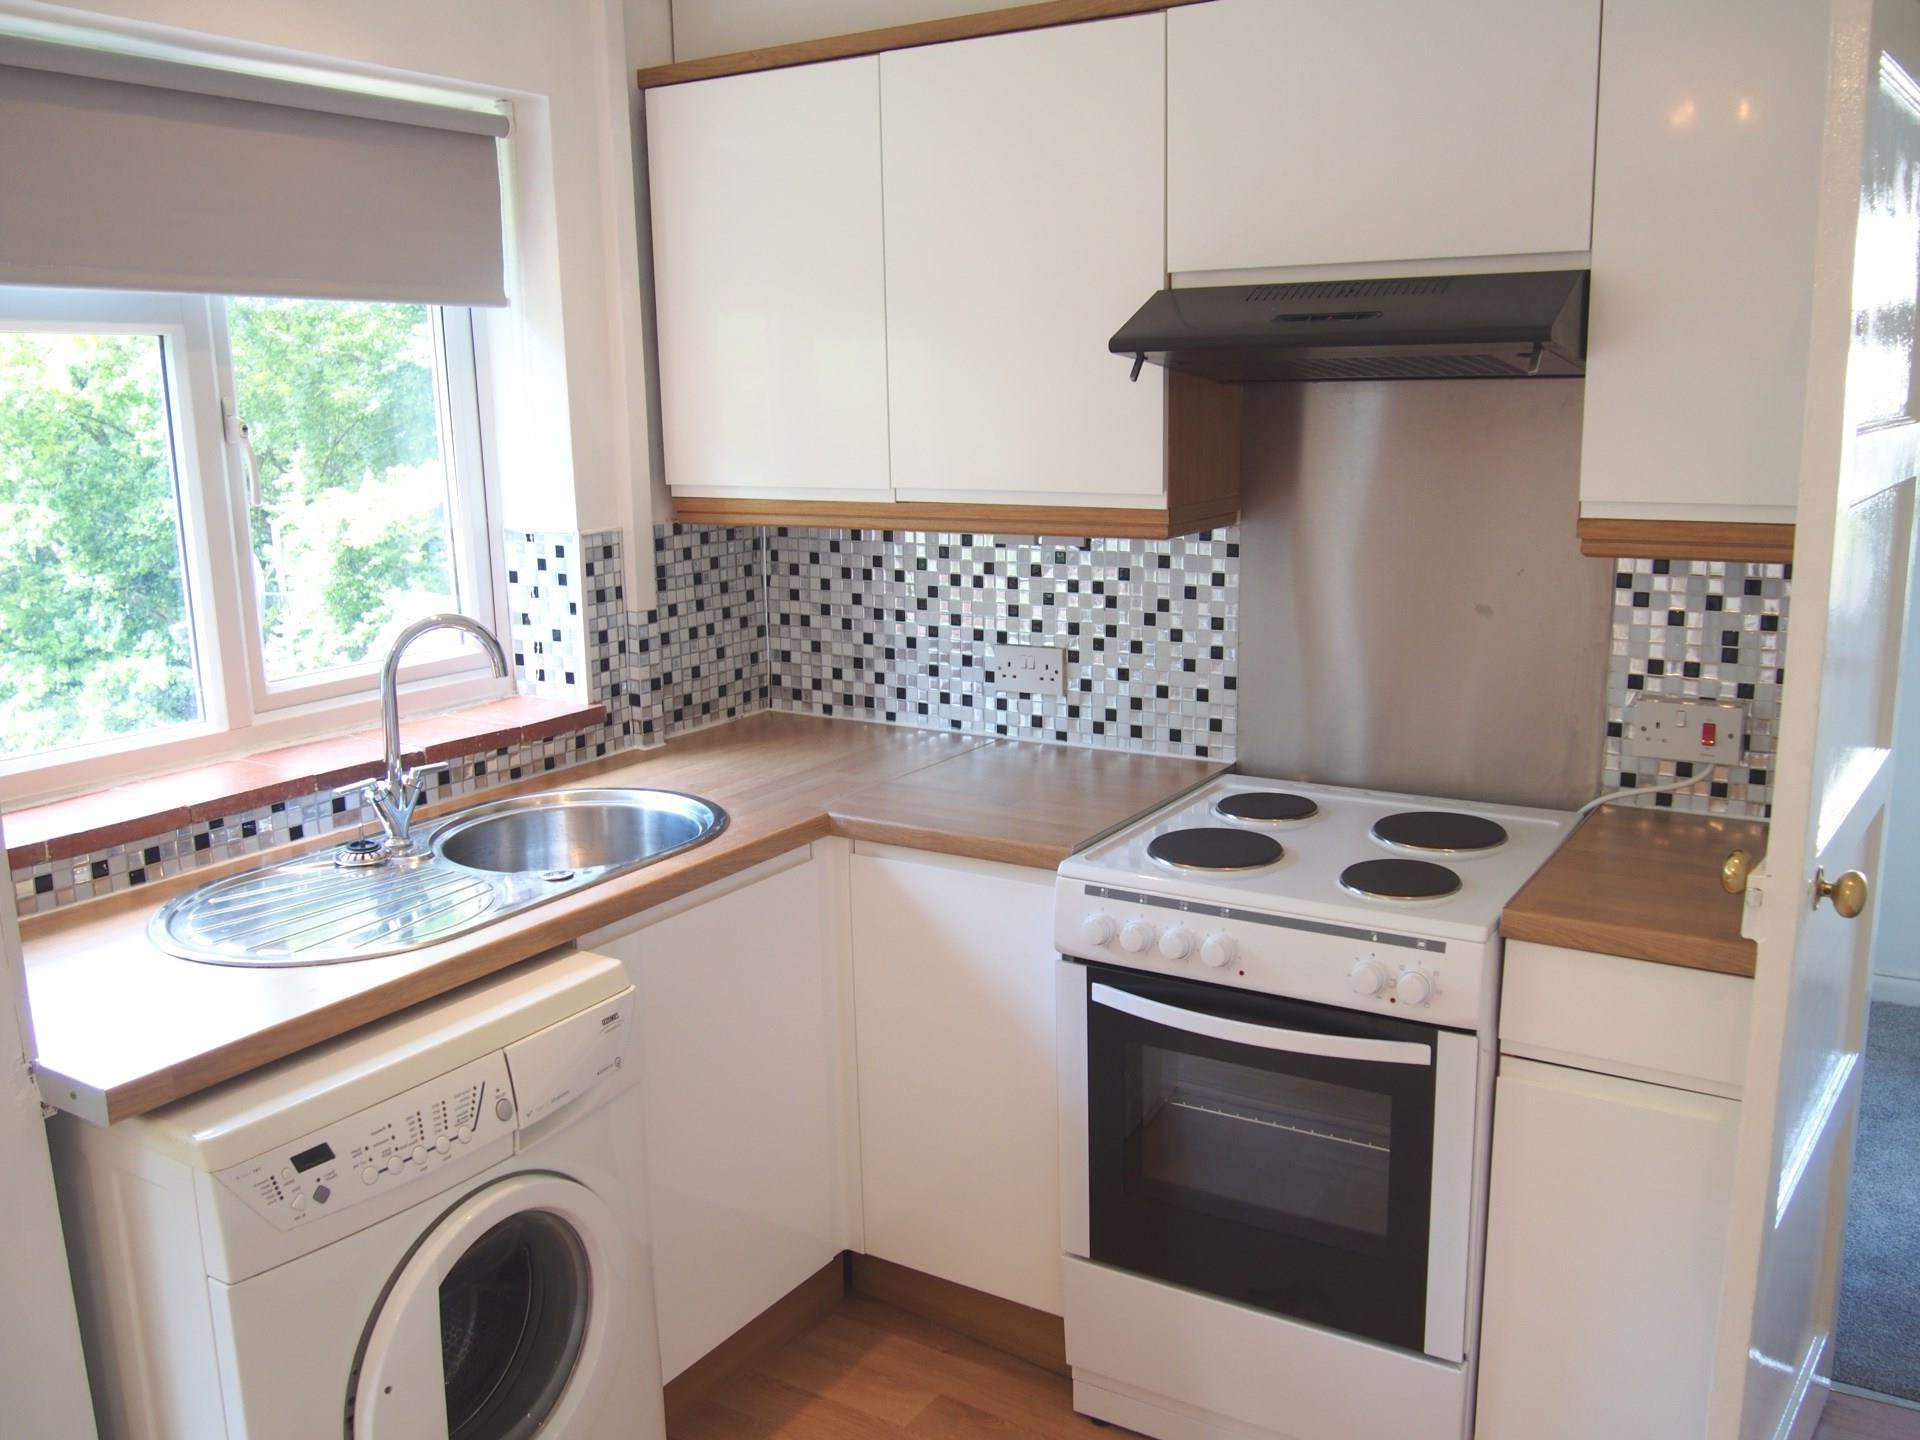 2 bed Flat for rent in High Wycombe. From Eden Sales & Lettings - High Wycombe